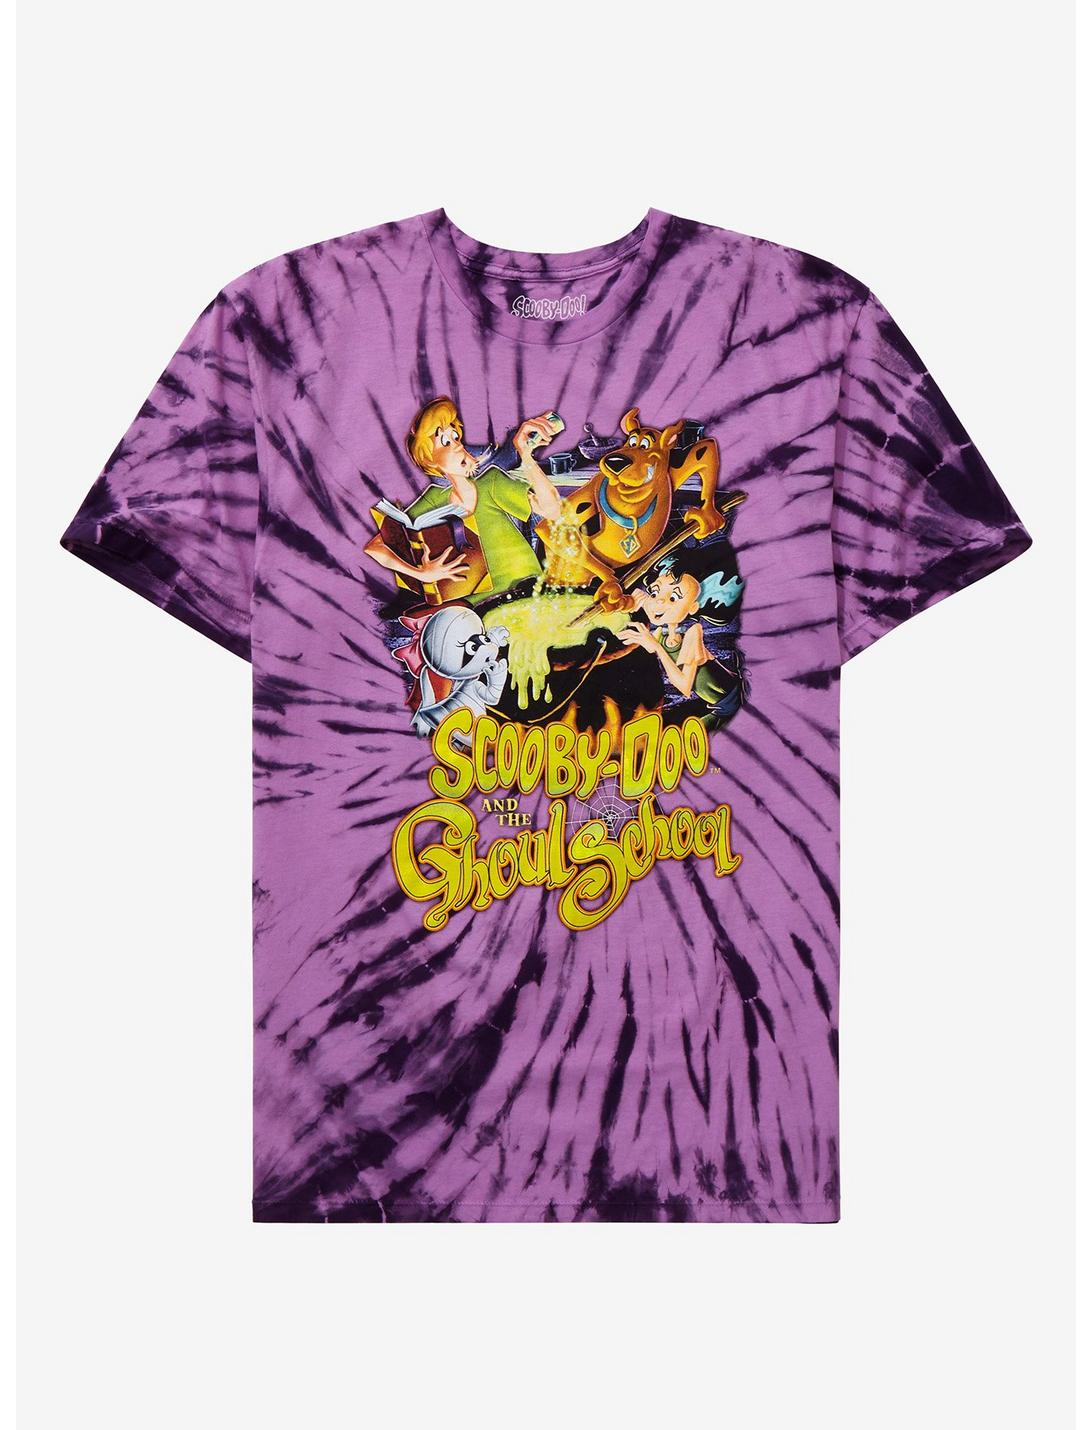 Scooby-Doo And The Ghoul School Tie-Dye T-Shirt, MULTI, hi-res